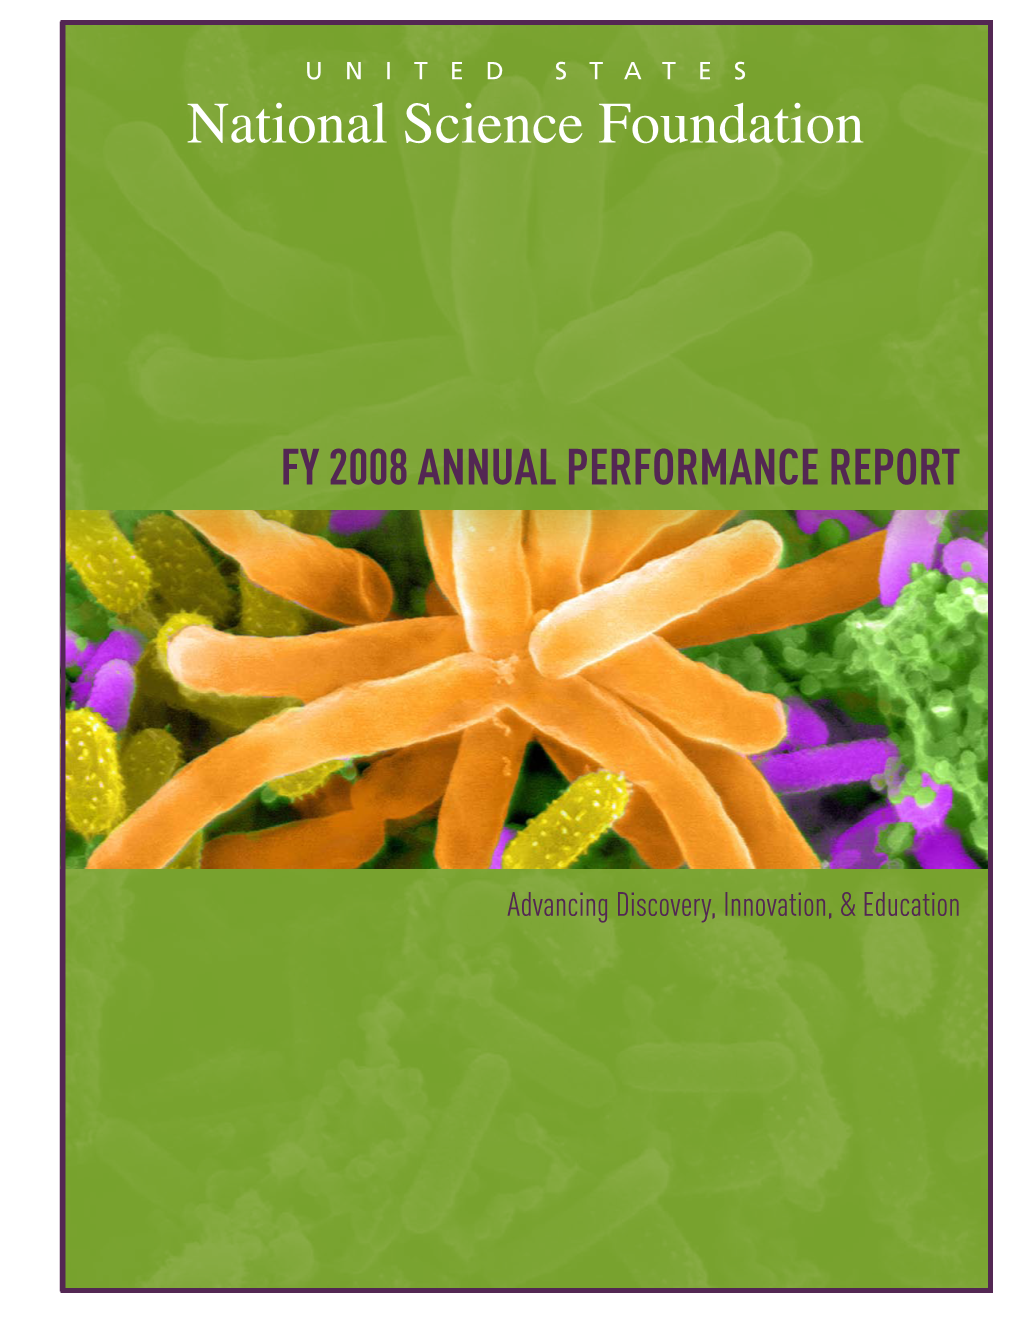 FY 2008 Annual Performance Report